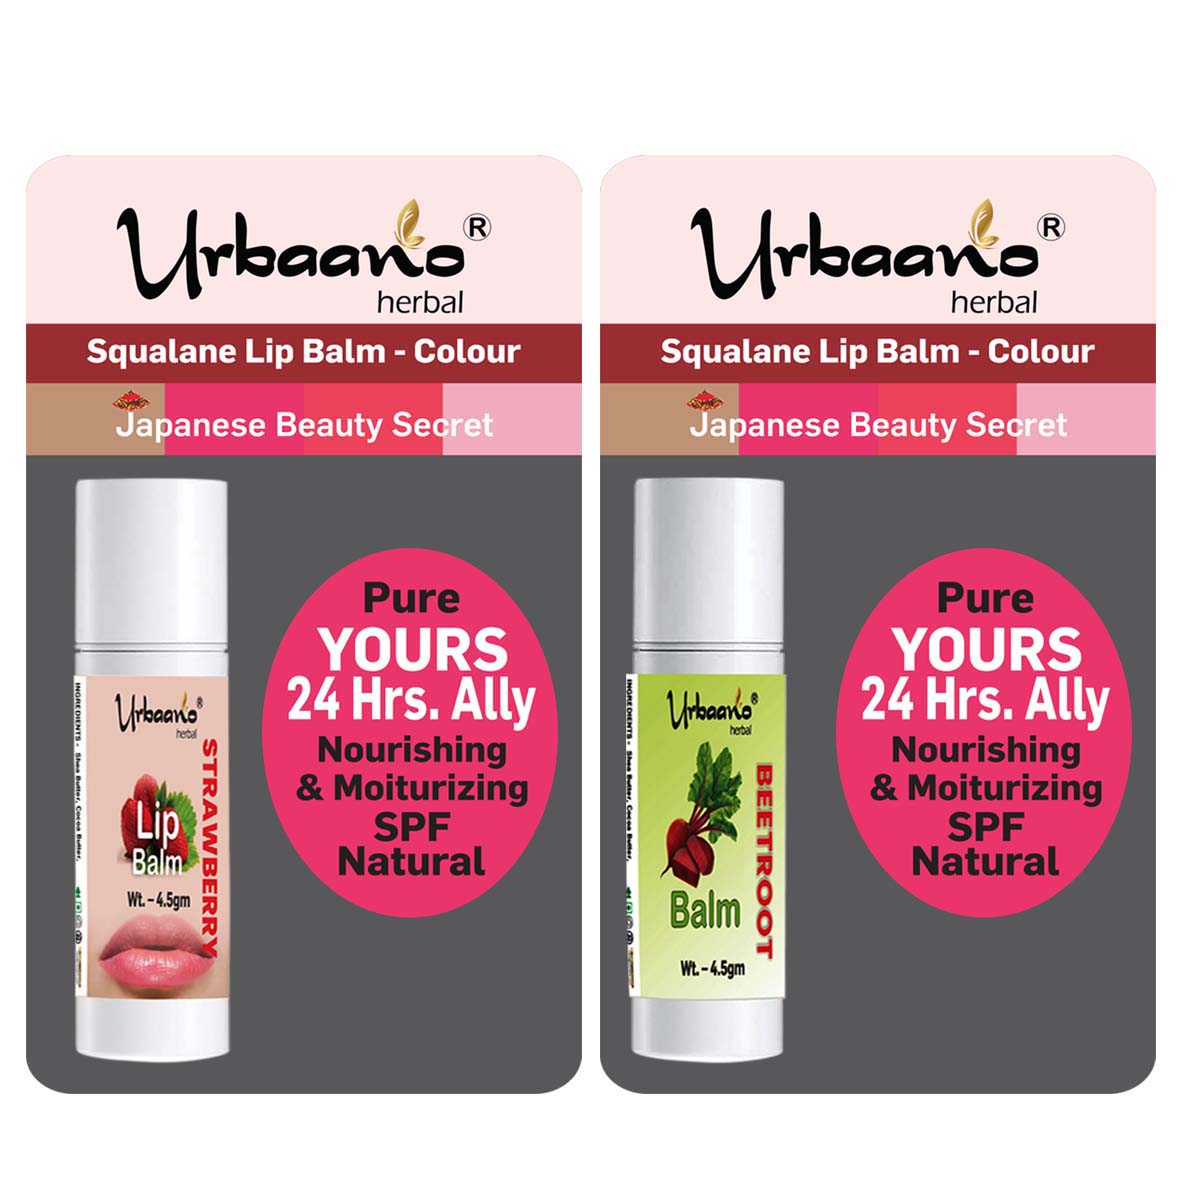 urbaano herbal beetroot, strawberry tint lip and cheek balm for dry, chapped dark lips, with olive squalane oil, organic oils